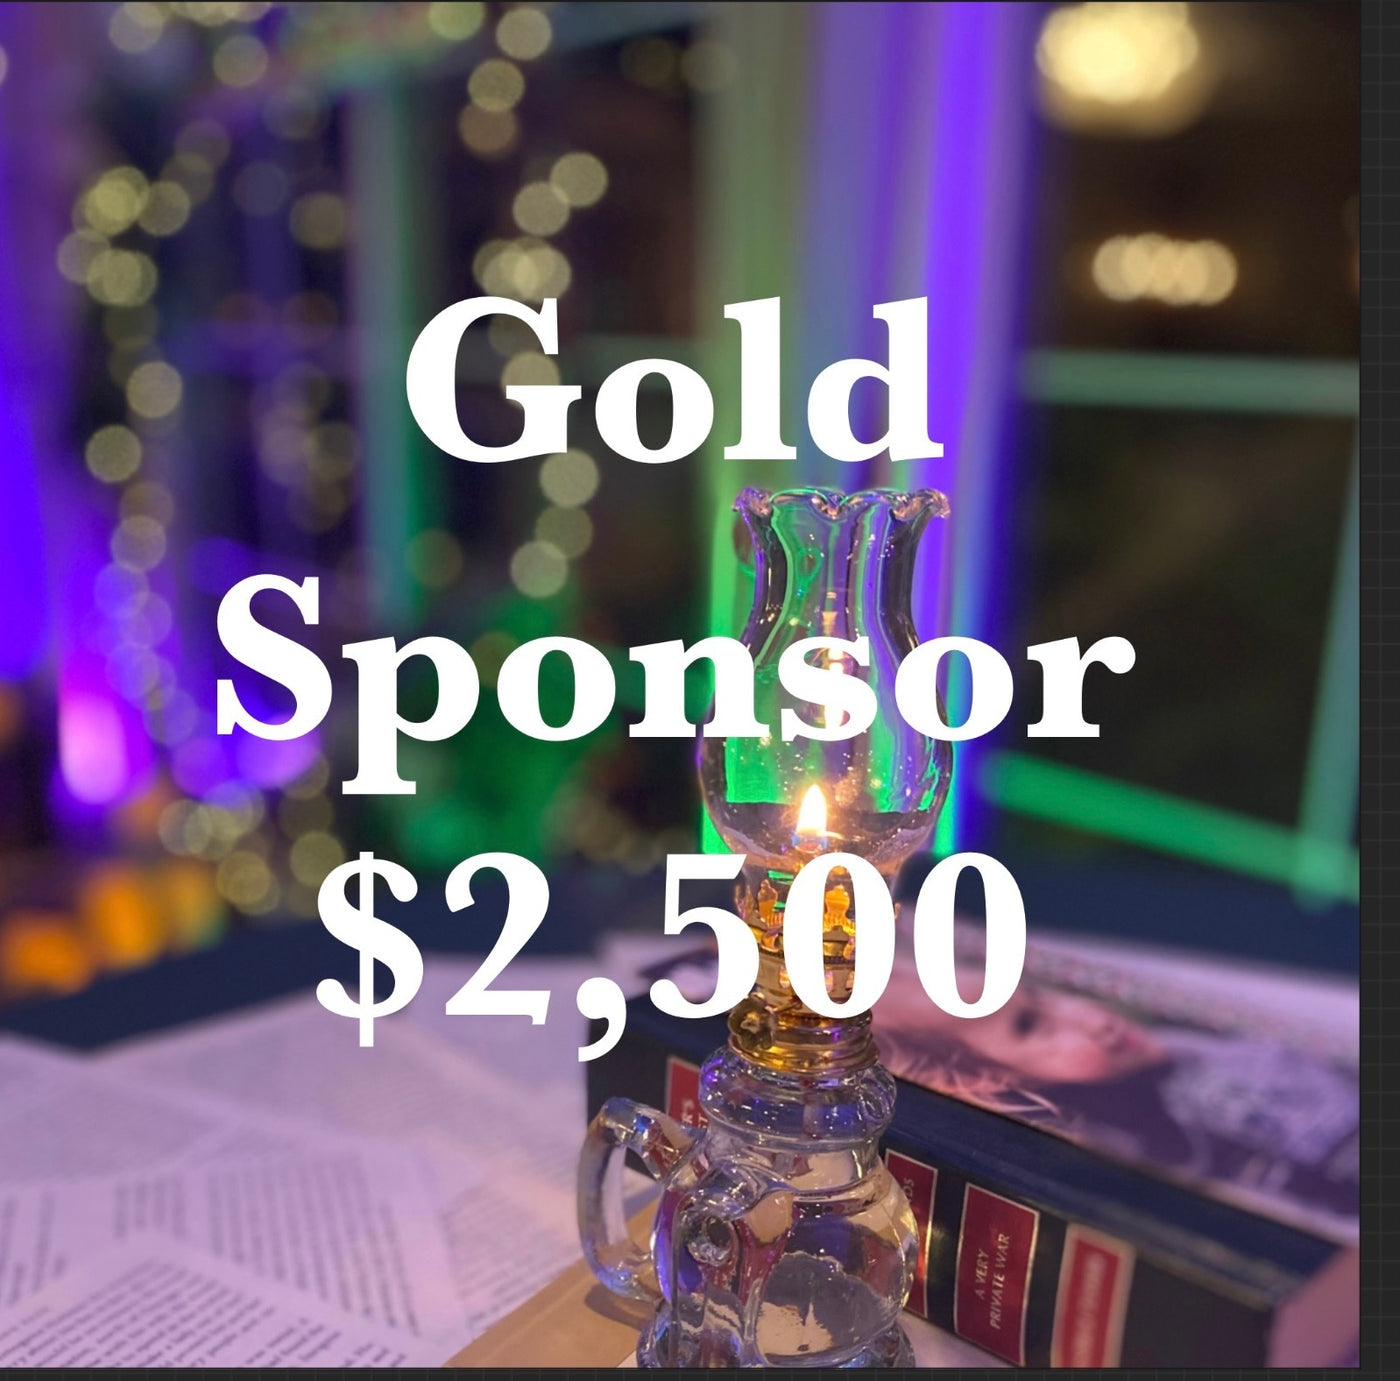 Green Ties for the Dream - Gold Sponsor  ($2,500)